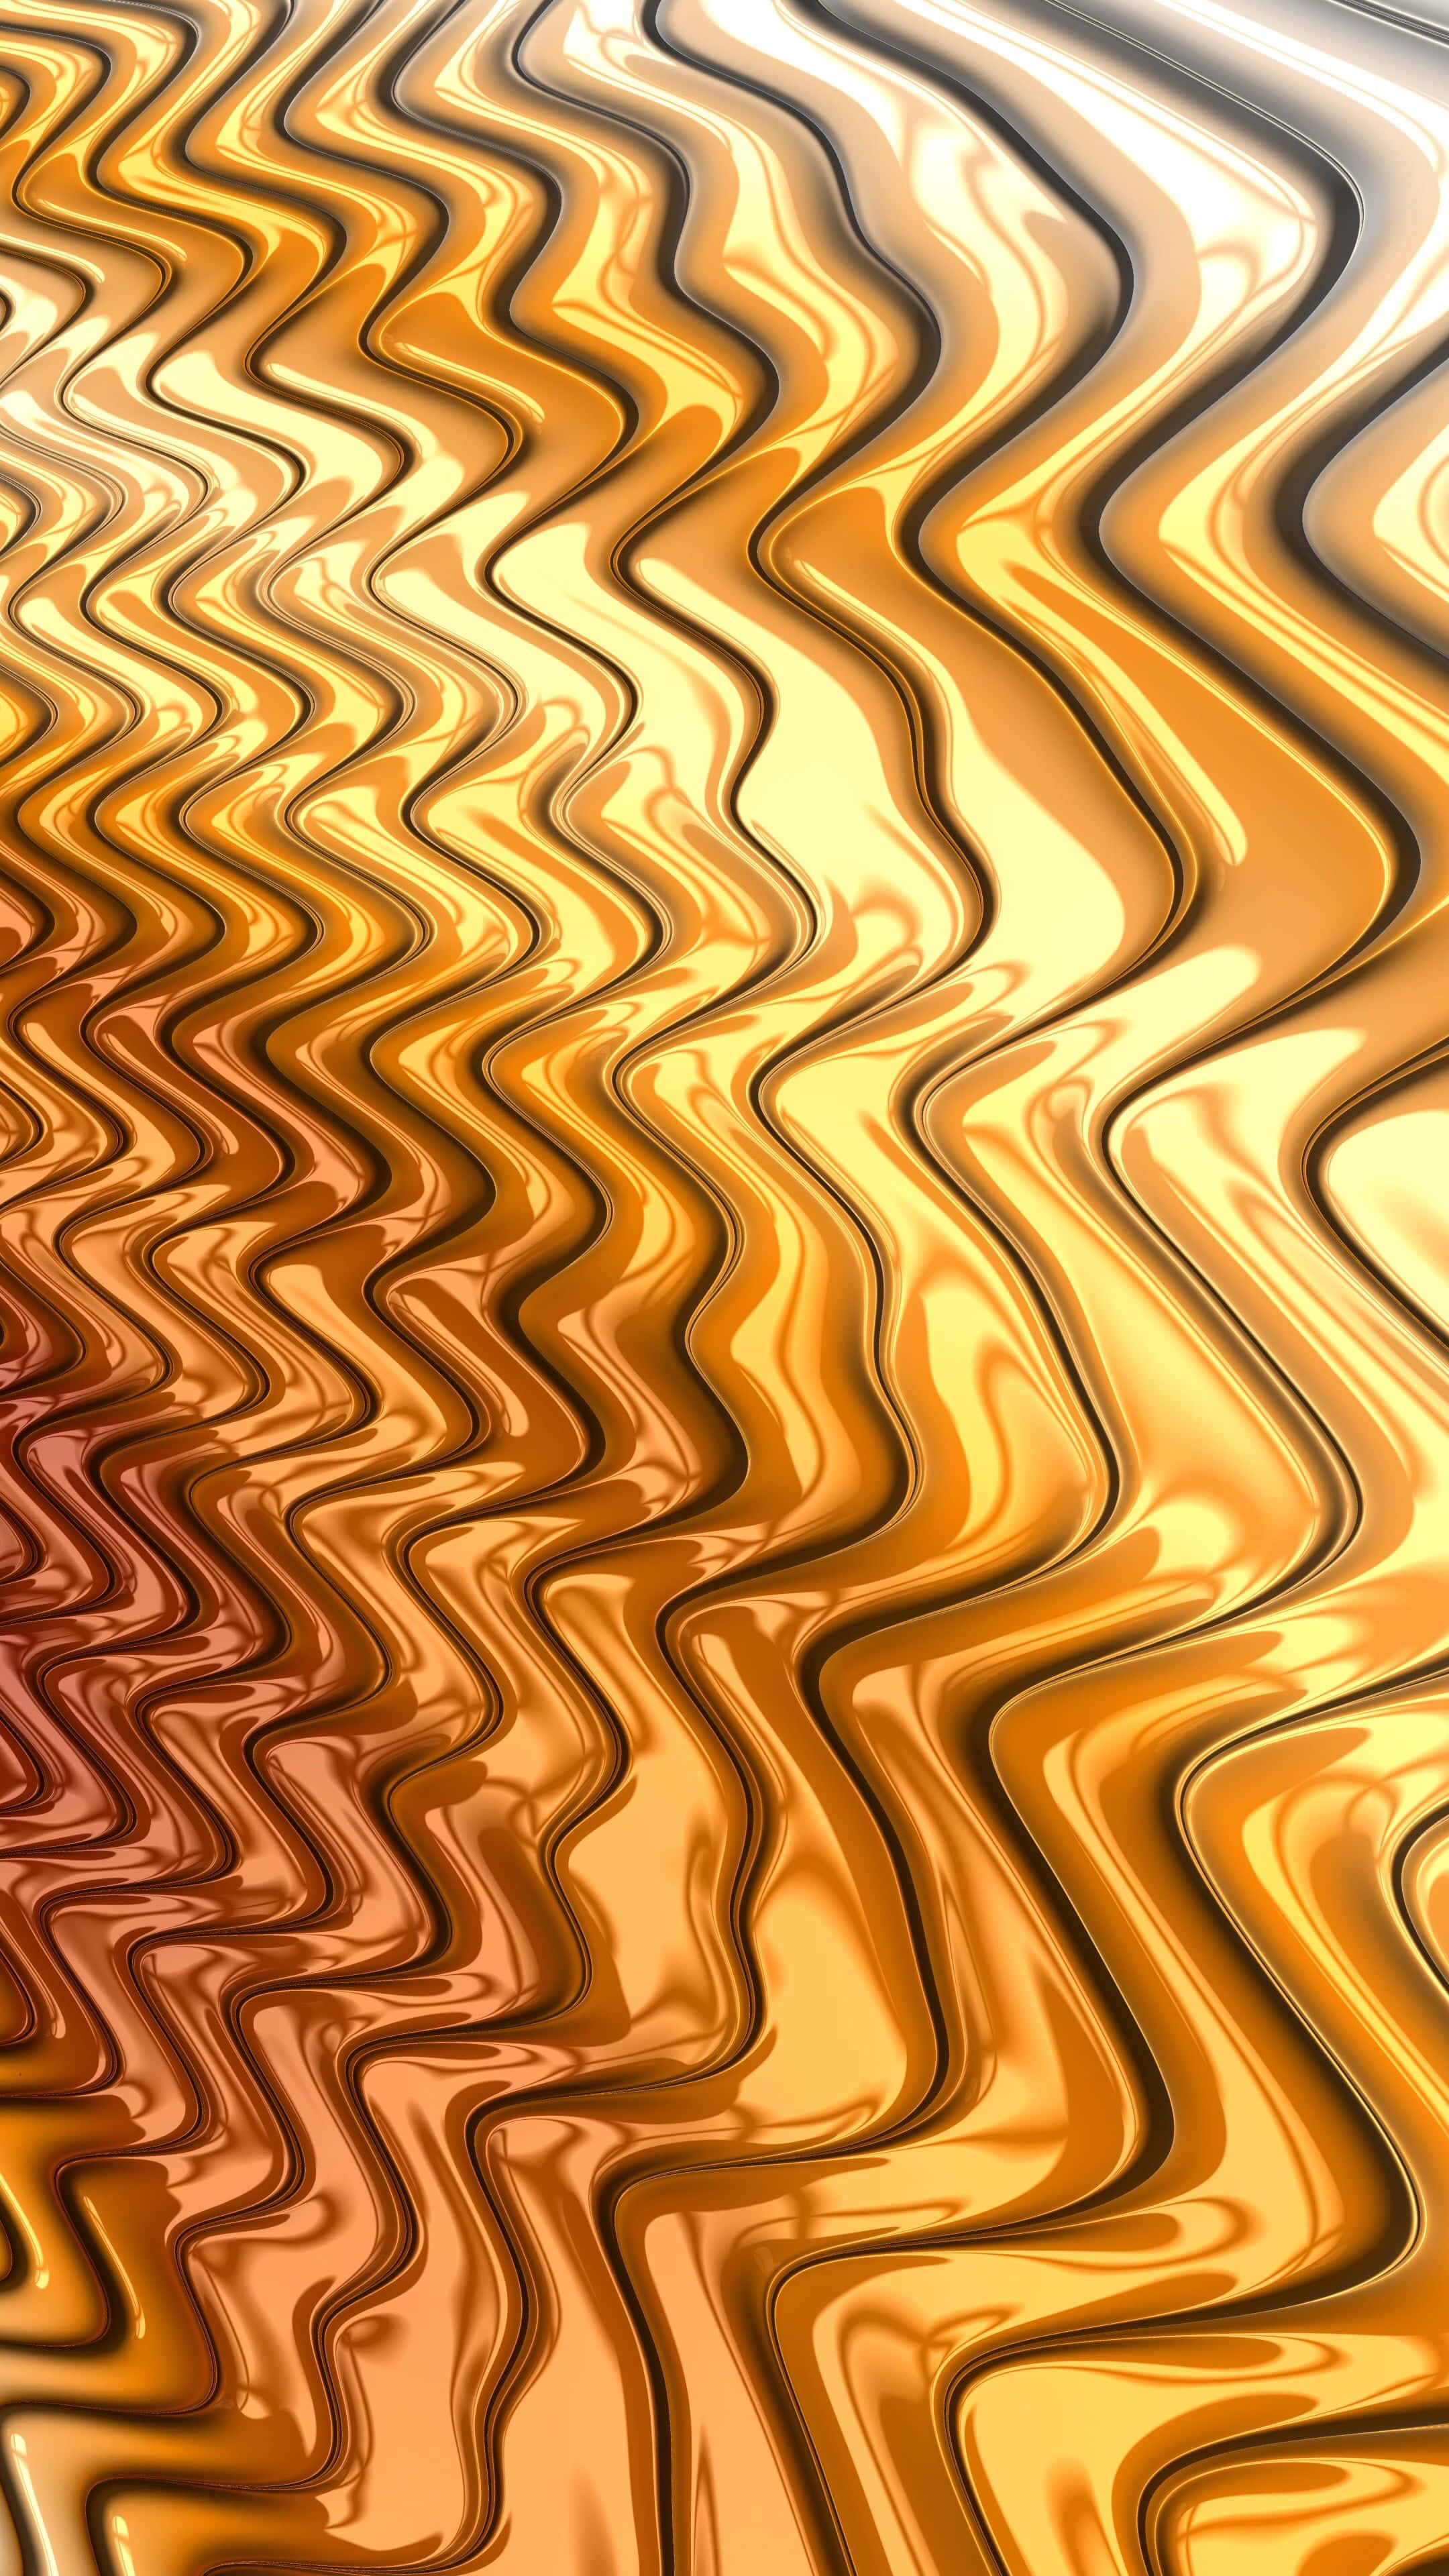 Shine bright with this dazzling Shiny Gold background